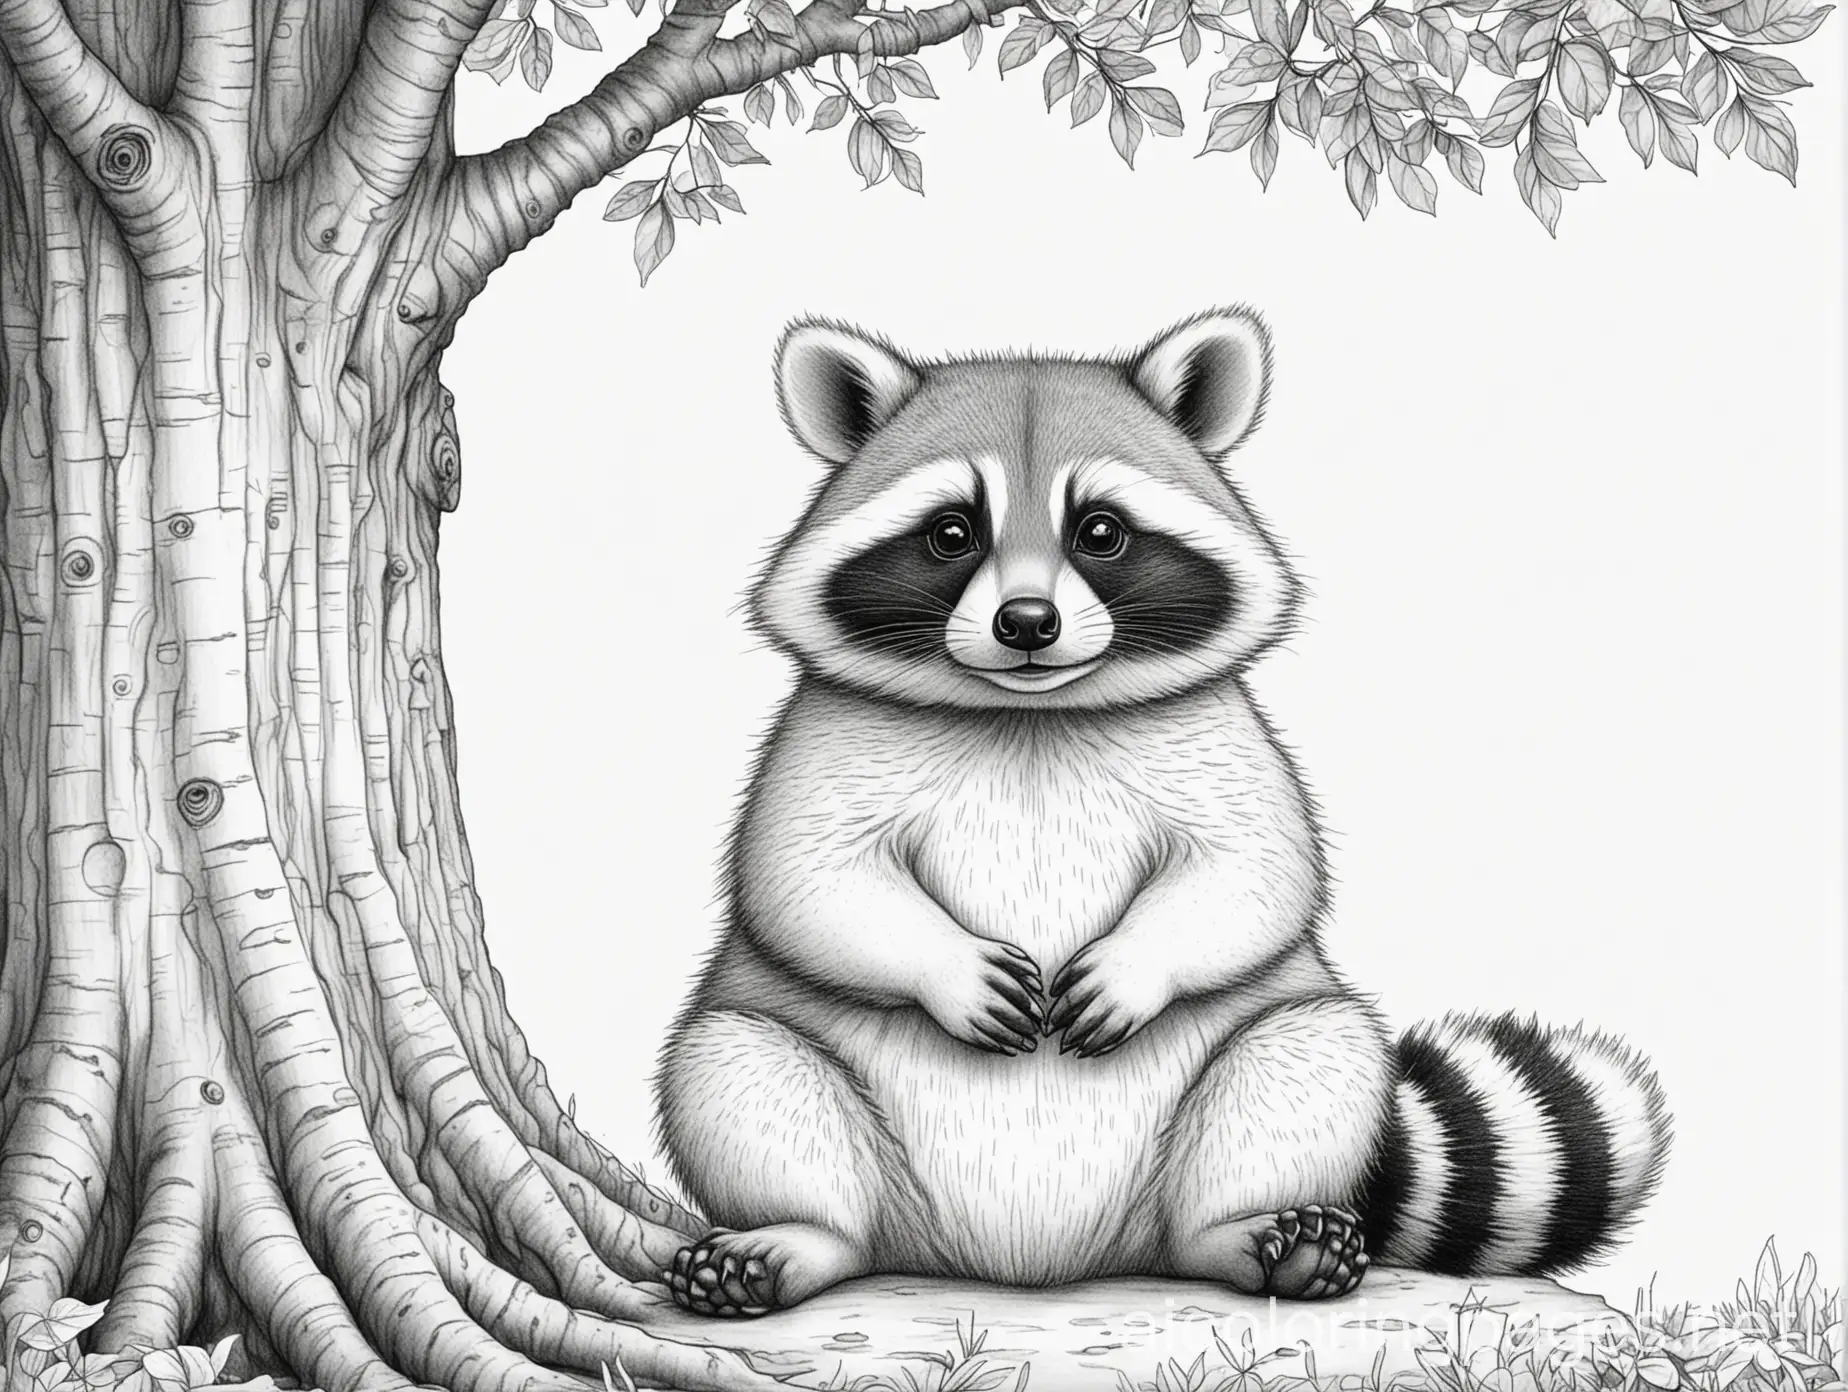 A fat raccoon 🦝 sitting at the bottom of a big tree, Coloring Page, black and white, line art, white background, Simplicity, Ample White Space. The background of the coloring page is plain white to make it easy for young children to color within the lines. The outlines of all the subjects are easy to distinguish, making it simple for kids to color without too much difficulty